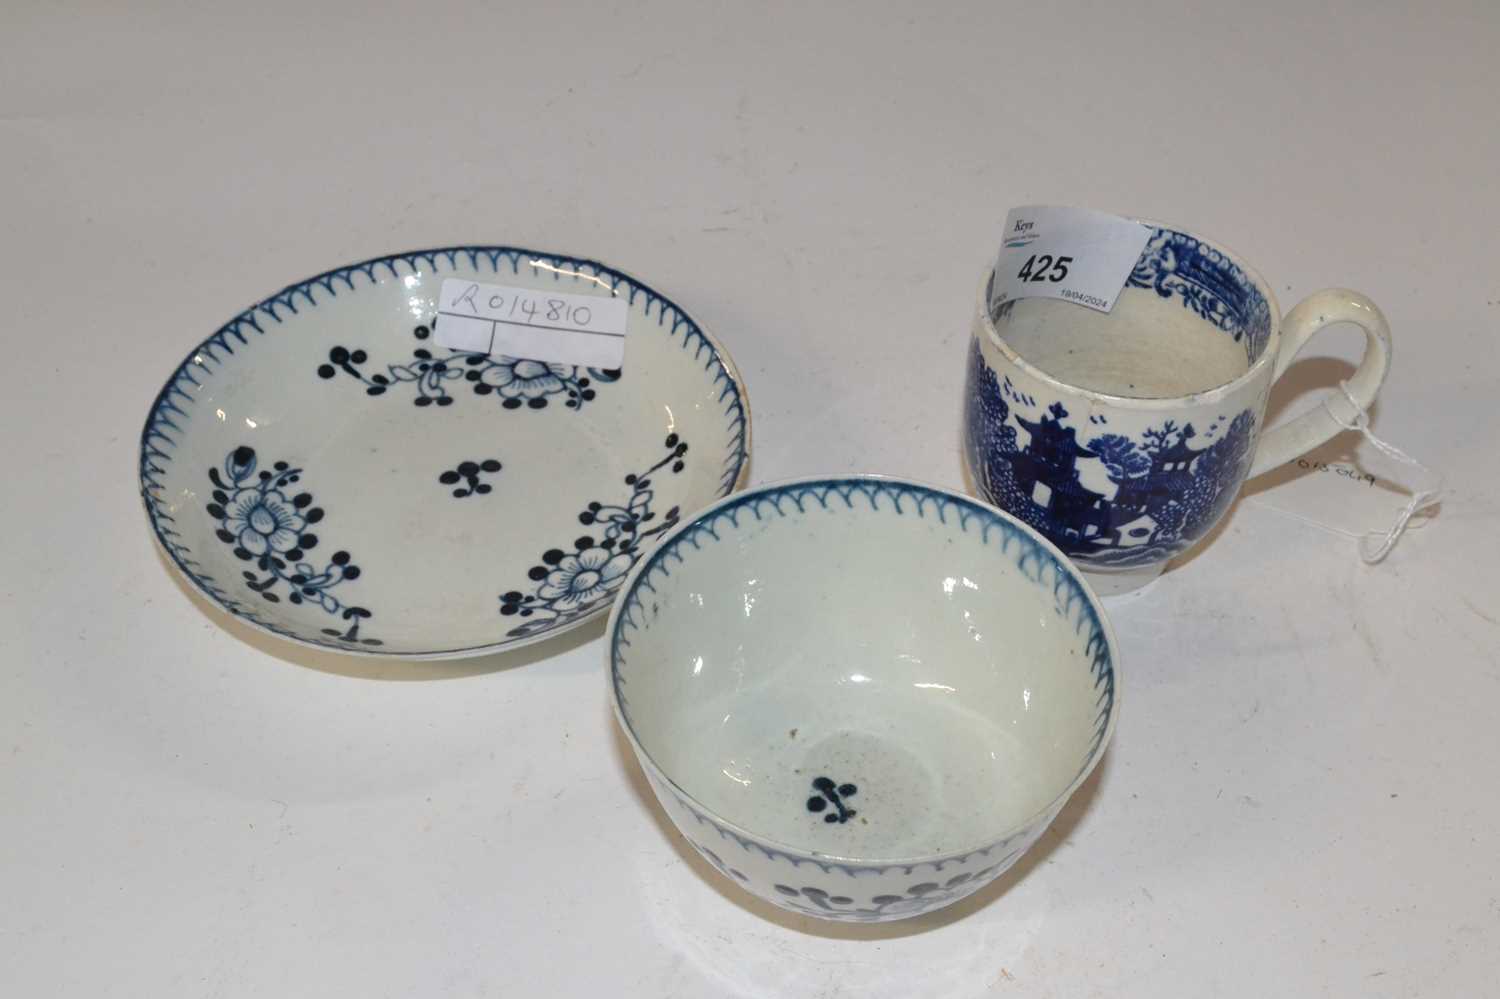 A Penningtons Liverpool tea bowl and saucer and further cup with blue and white chinoiserie design - Image 2 of 3